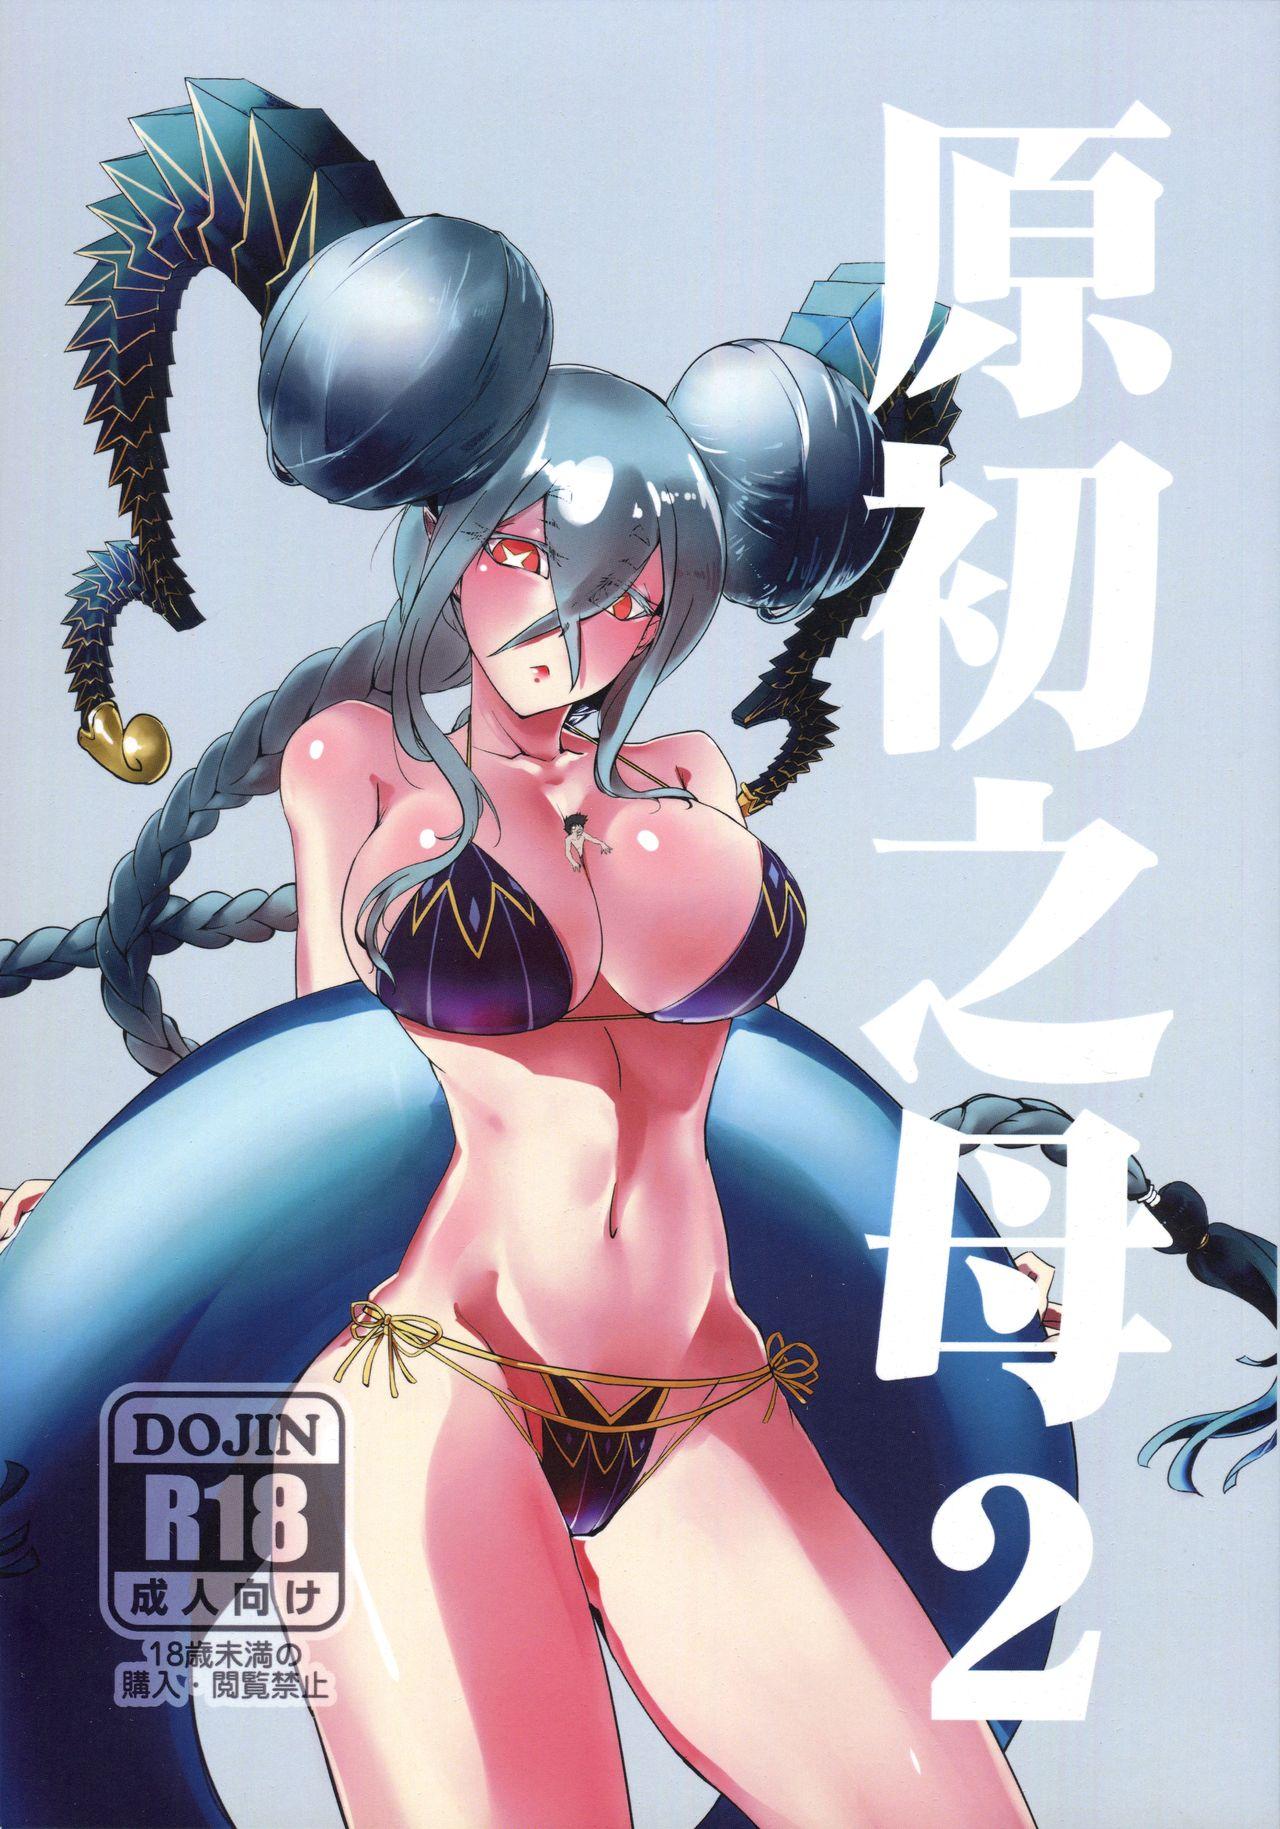 Hot Brunette Gensho no Haha 2 - Fate grand order Tight - Picture 1